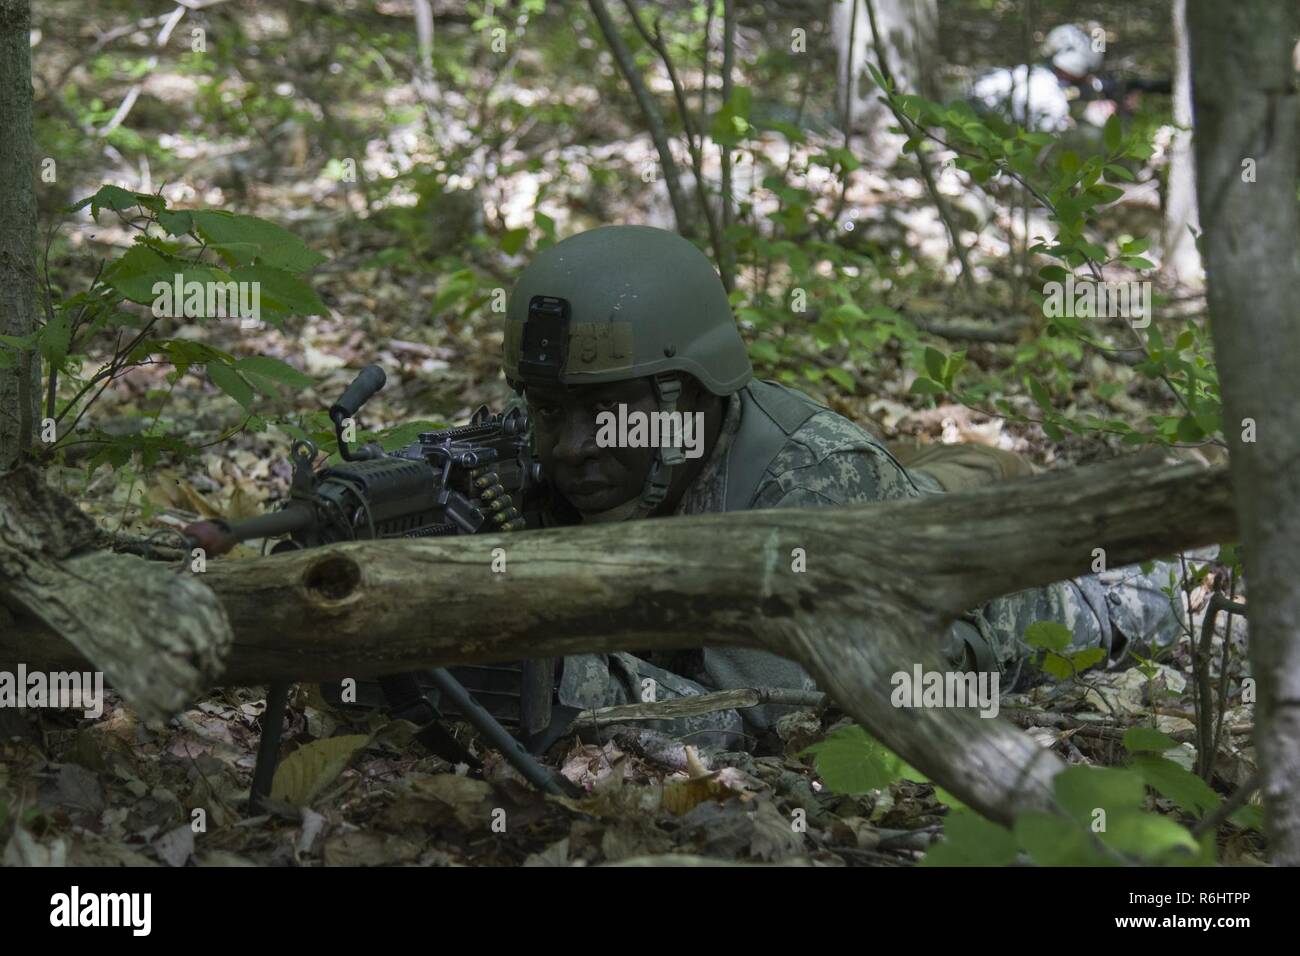 U.S. Army Officer Candidate Isaac Abotsi, assigned to the Hotel Company, 2nd Modular Training Battalion, 124th Regiment (Regional Training Institute), Vermont National Guard, provides security during a bunker clearing lane at New Hampshire National Guard Training Site in Center Strafford, Nh., May 19, 2017. Soldiers from Connecticut, Maine, Massachusetts, New Hampshire, New Jersey, New York, Rhode Island, and Vermont participated in the Officer Candidate School Field Leadership Exercise in preparation for graduation and commission. Stock Photo